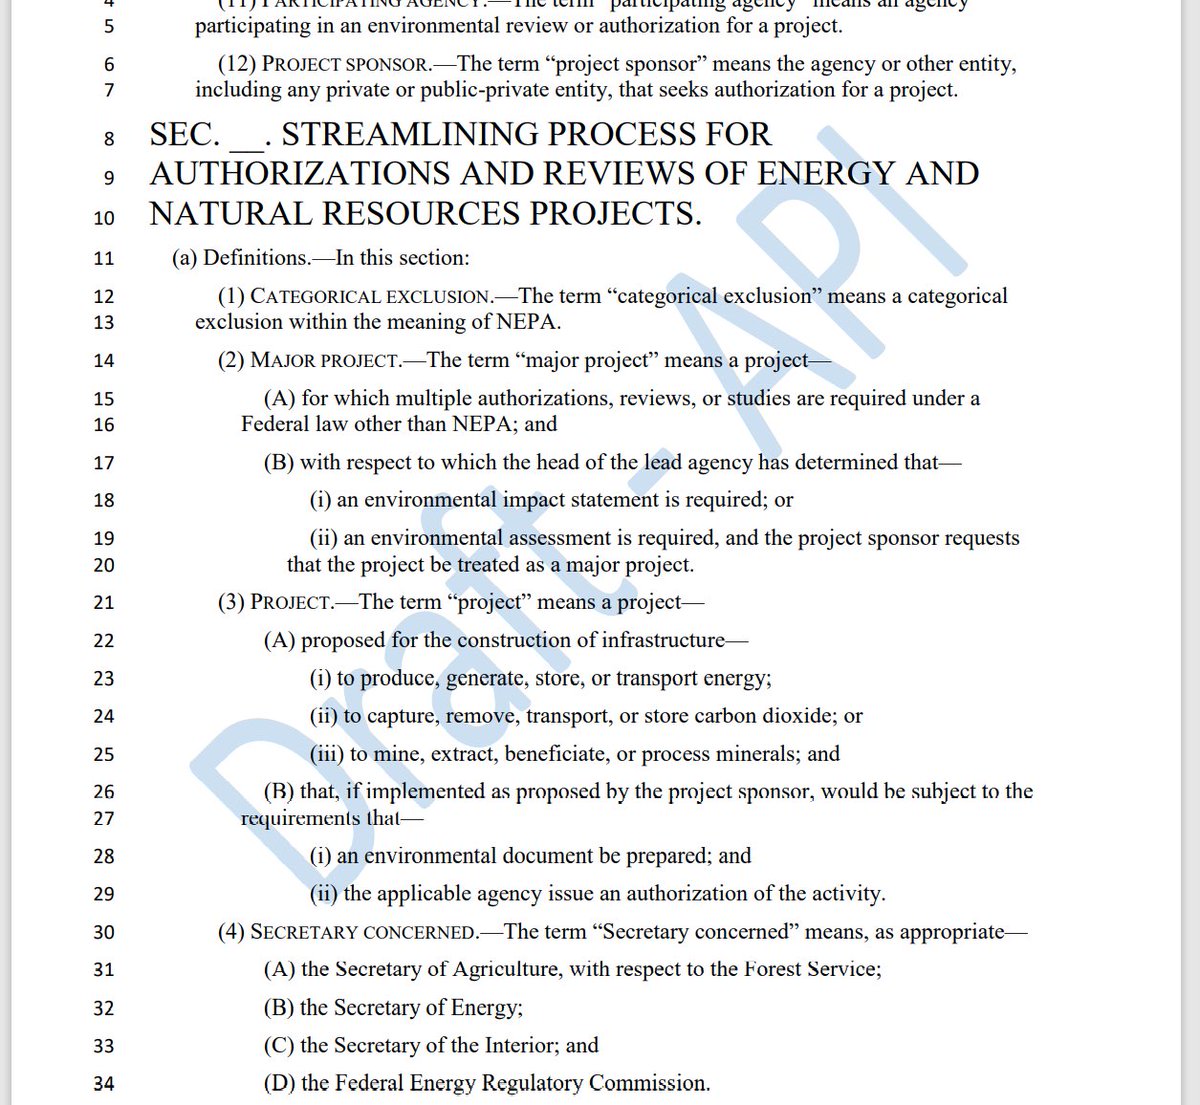 @RepRaulGrijalva refers to leaked draft legislation with an API watermark and points to media reports saying Dem Leaders “have agreed to advance a series of anti-enviro & anti-enviro  justice provisions, at the behest of the American Petroleum Institute (API).”